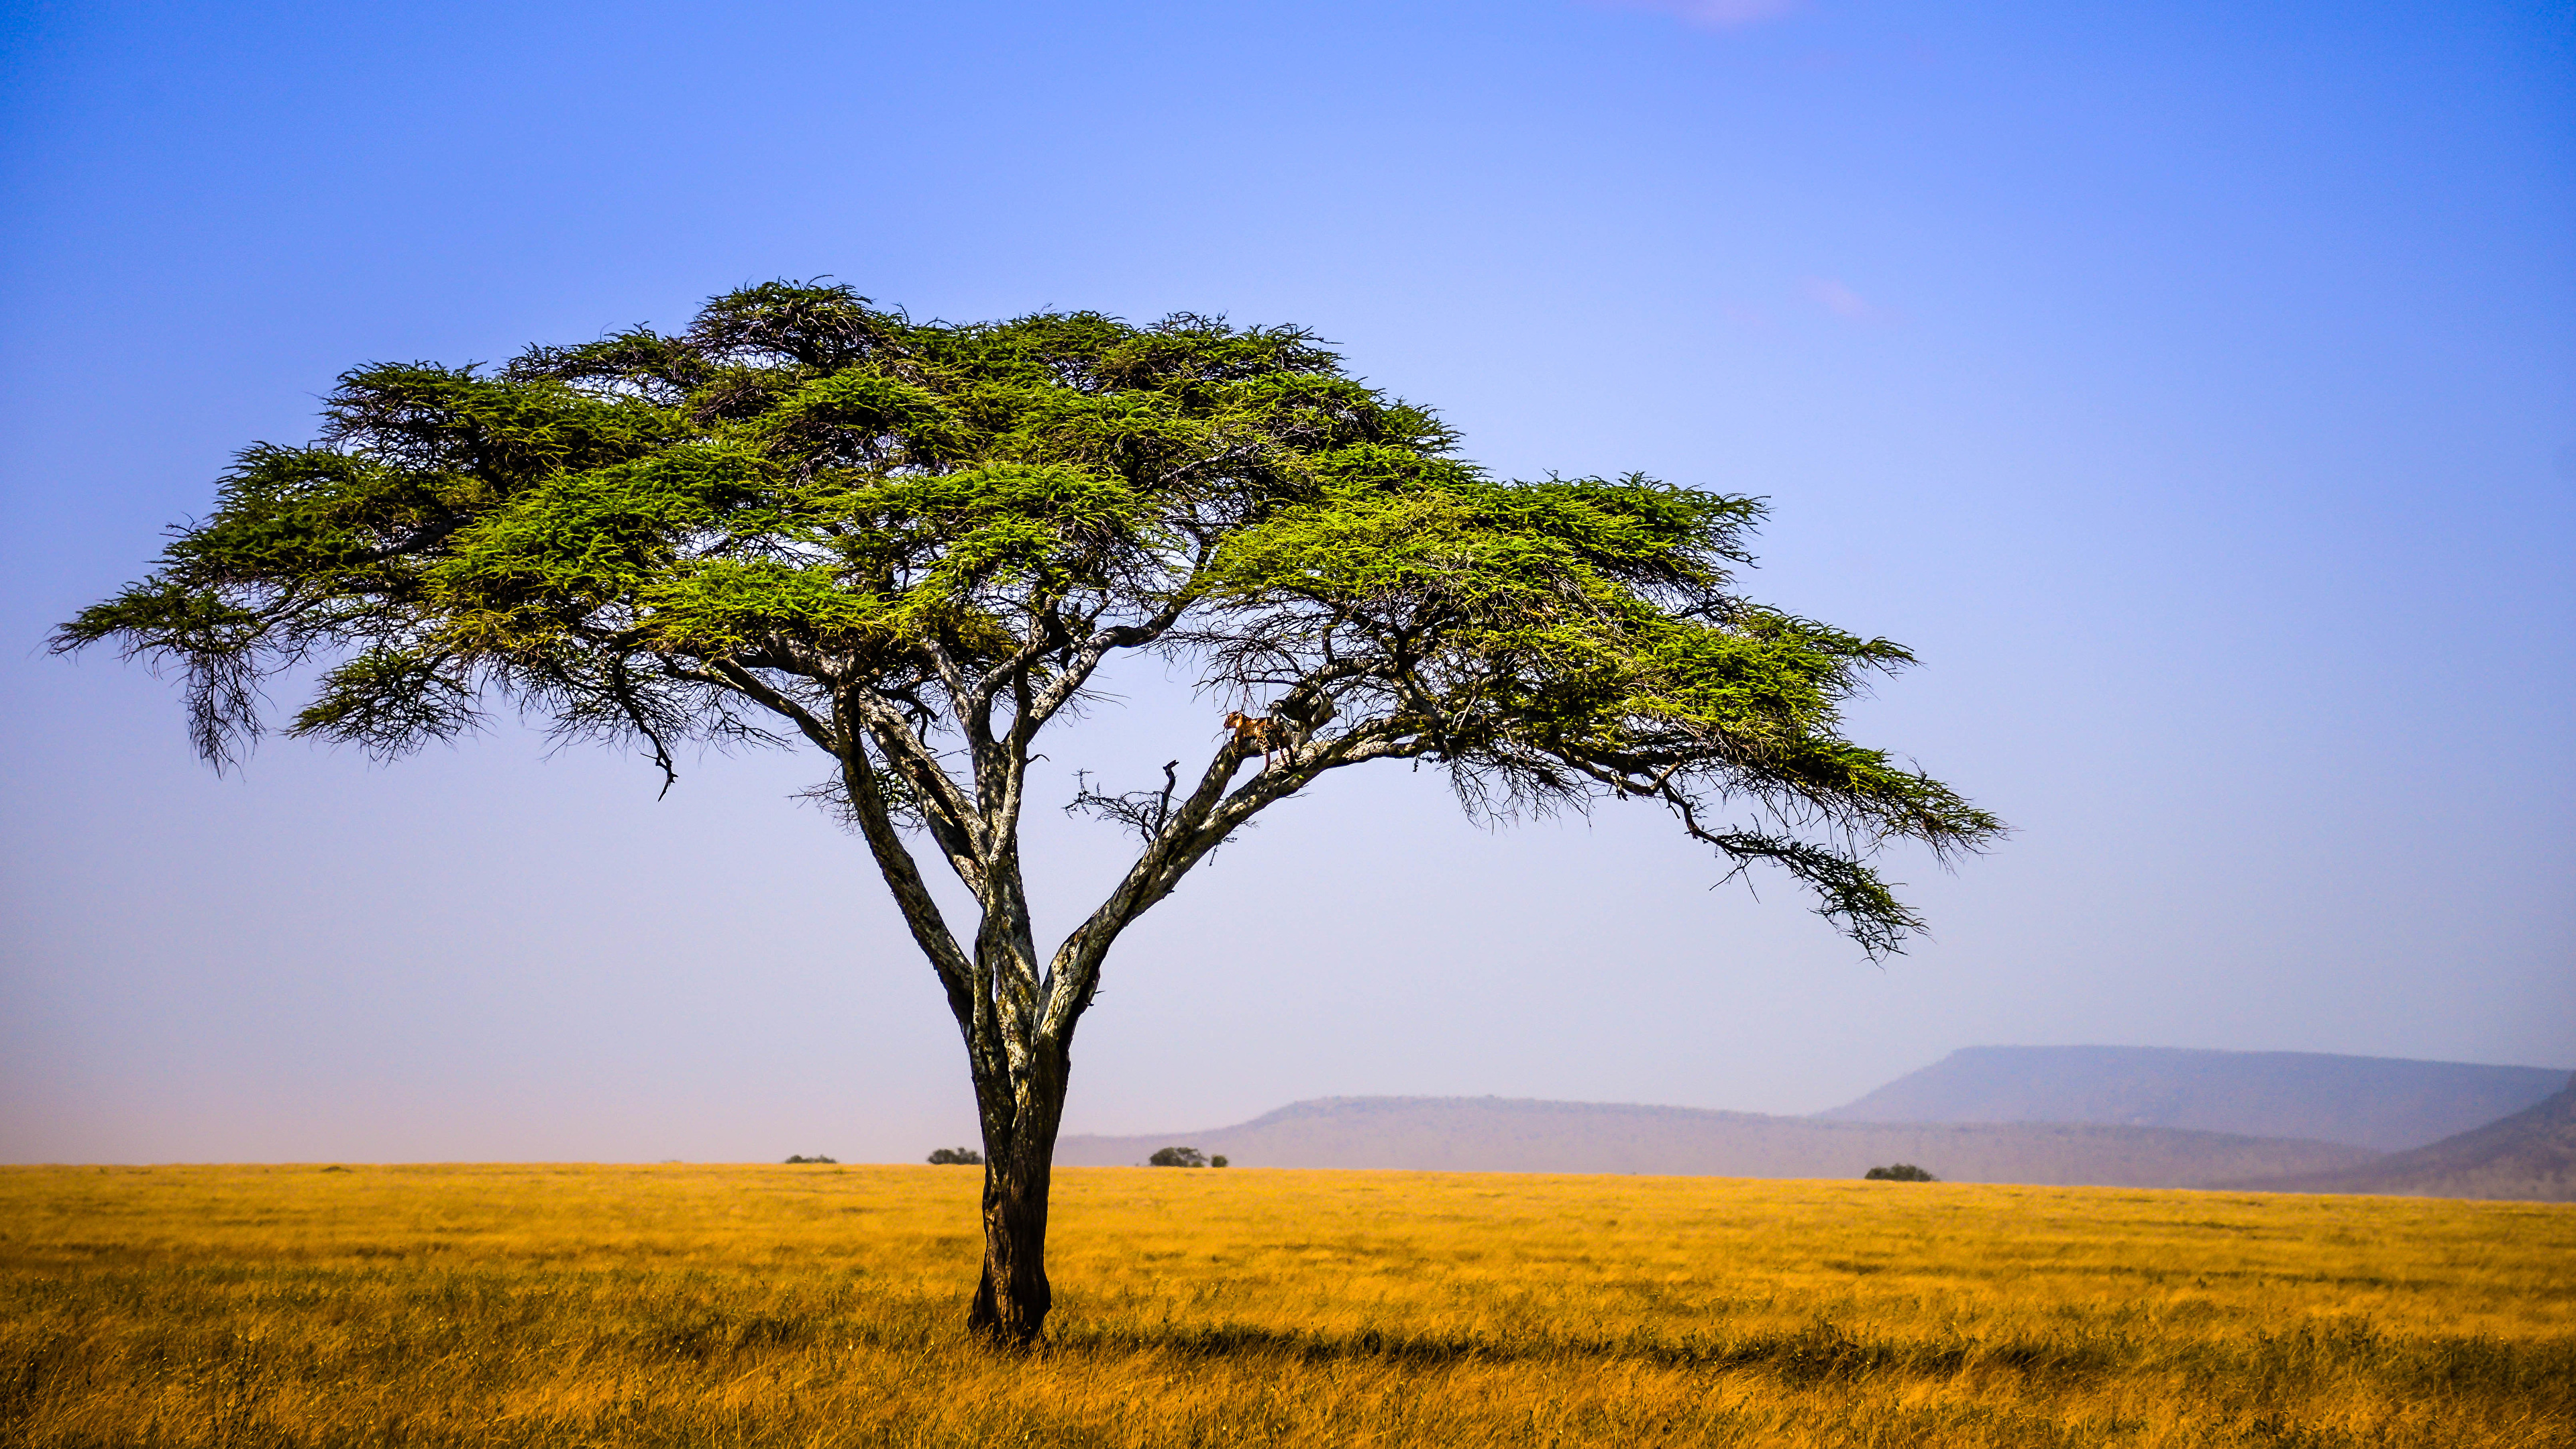 Grassland: African, Scenery, Country setting, Natural surroundings, Rural area. 3840x2160 4K Background.